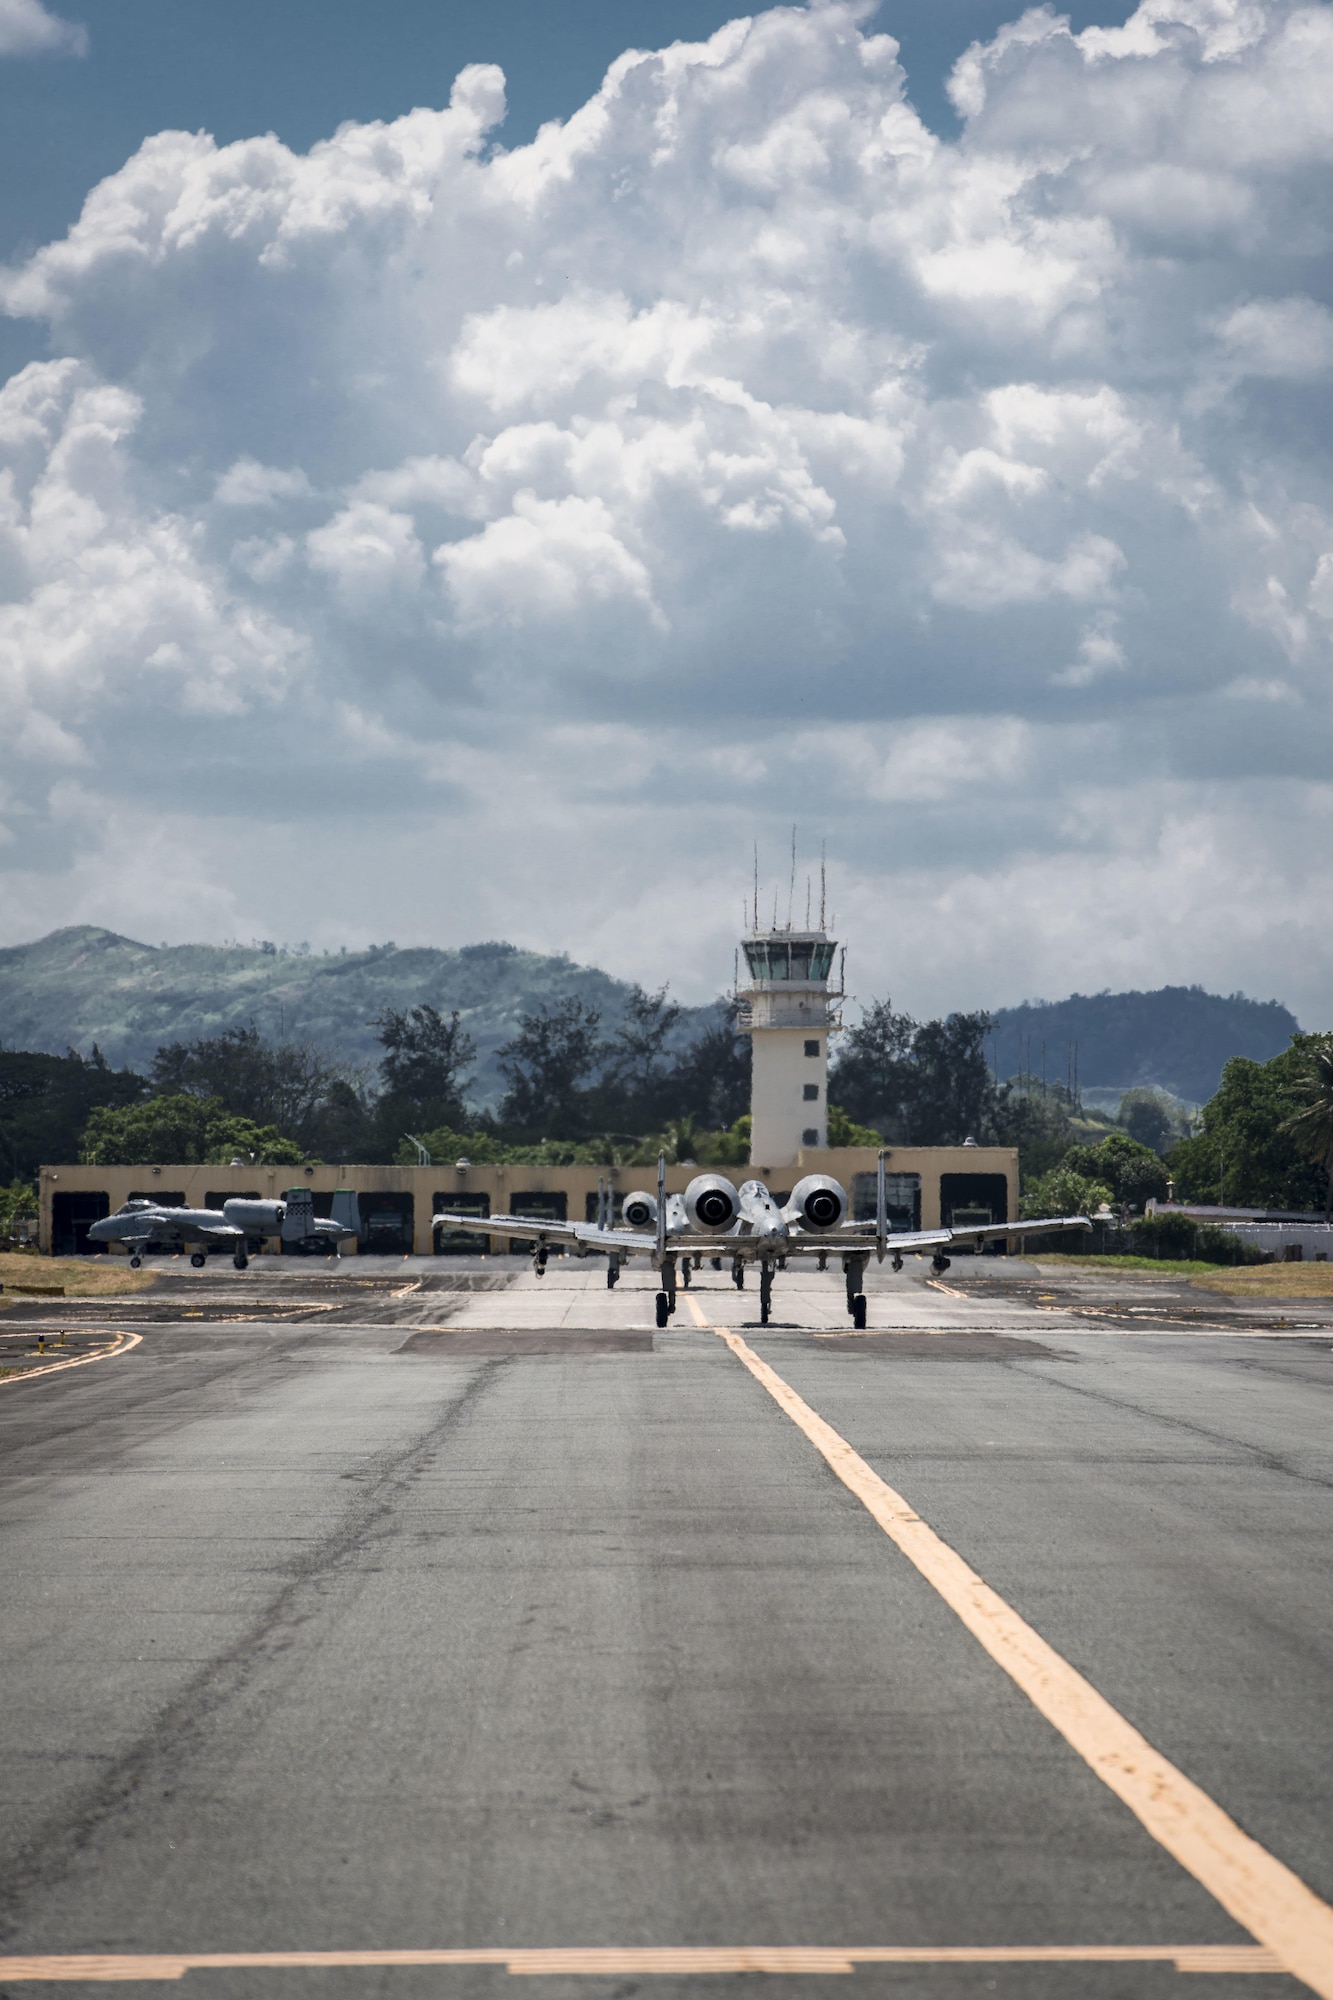 Four U.S. Air Force A-10C Thunderbolt IIs, with the 51st Fighter Wing, Osan Air Base, Republic of Korea, return to Clark Air Base, Philippines, April 19, 2016, after flying their first operational mission through international airspace in the vicinity of Scarborough Shoal west of the Philippines providing air and maritime situational awareness. These missions promote transparency and safety of movement in international waters and airspace, showcasing the U.S. commitment to ally and partner nations and to the Indo-Asia-Pacific region’s continued stability now and for generations to come. (U.S. Air Force photo by Staff Sgt. Benjamin W. Stratton)